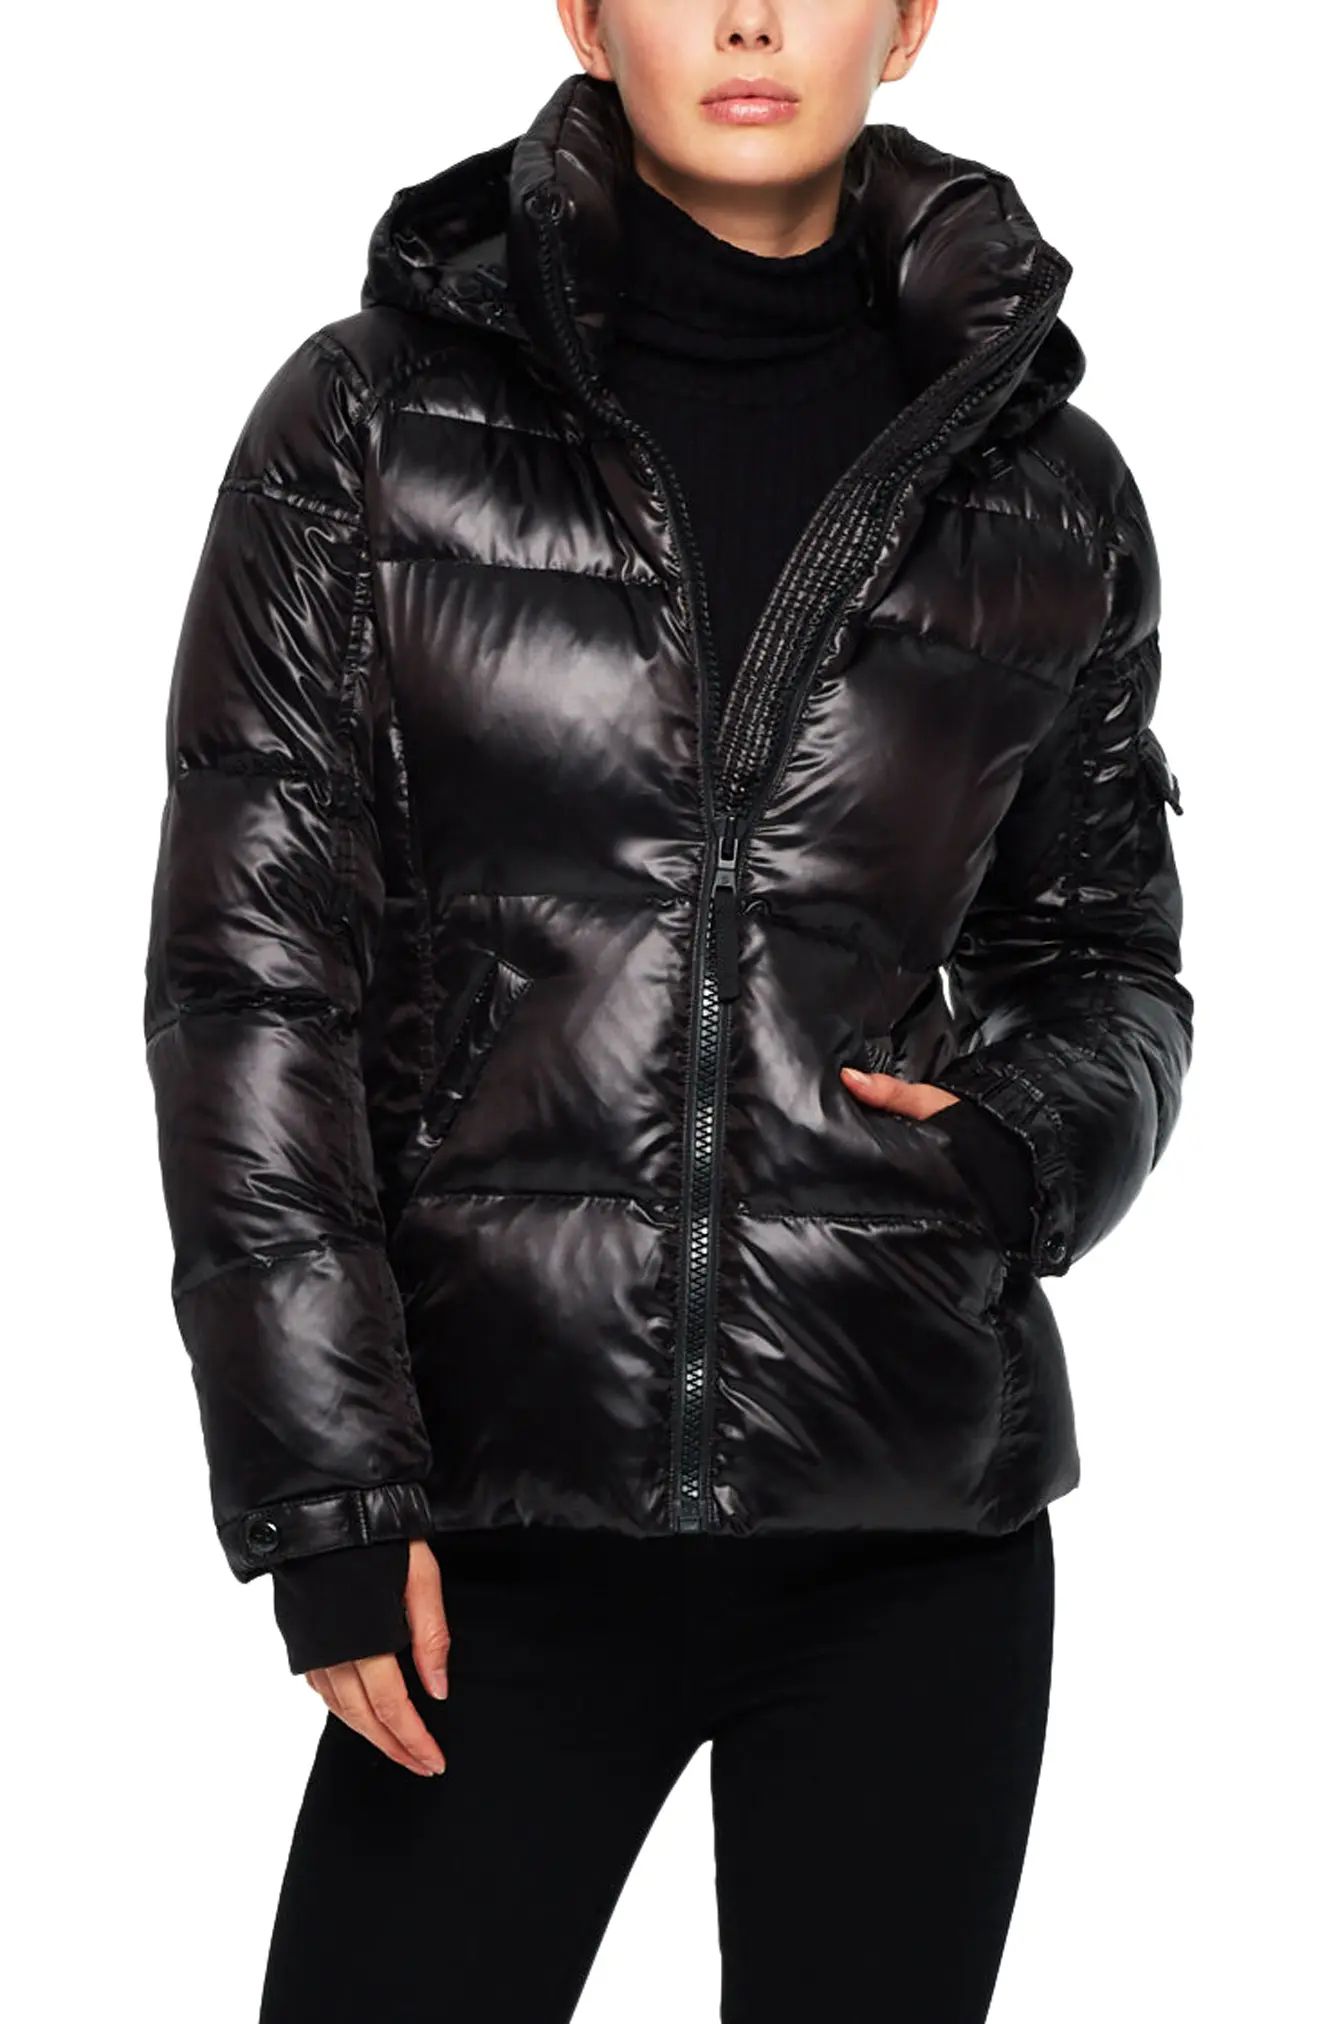 S13 'Kylie' Metallic Quilted Jacket with Removable Hood | Nordstrom